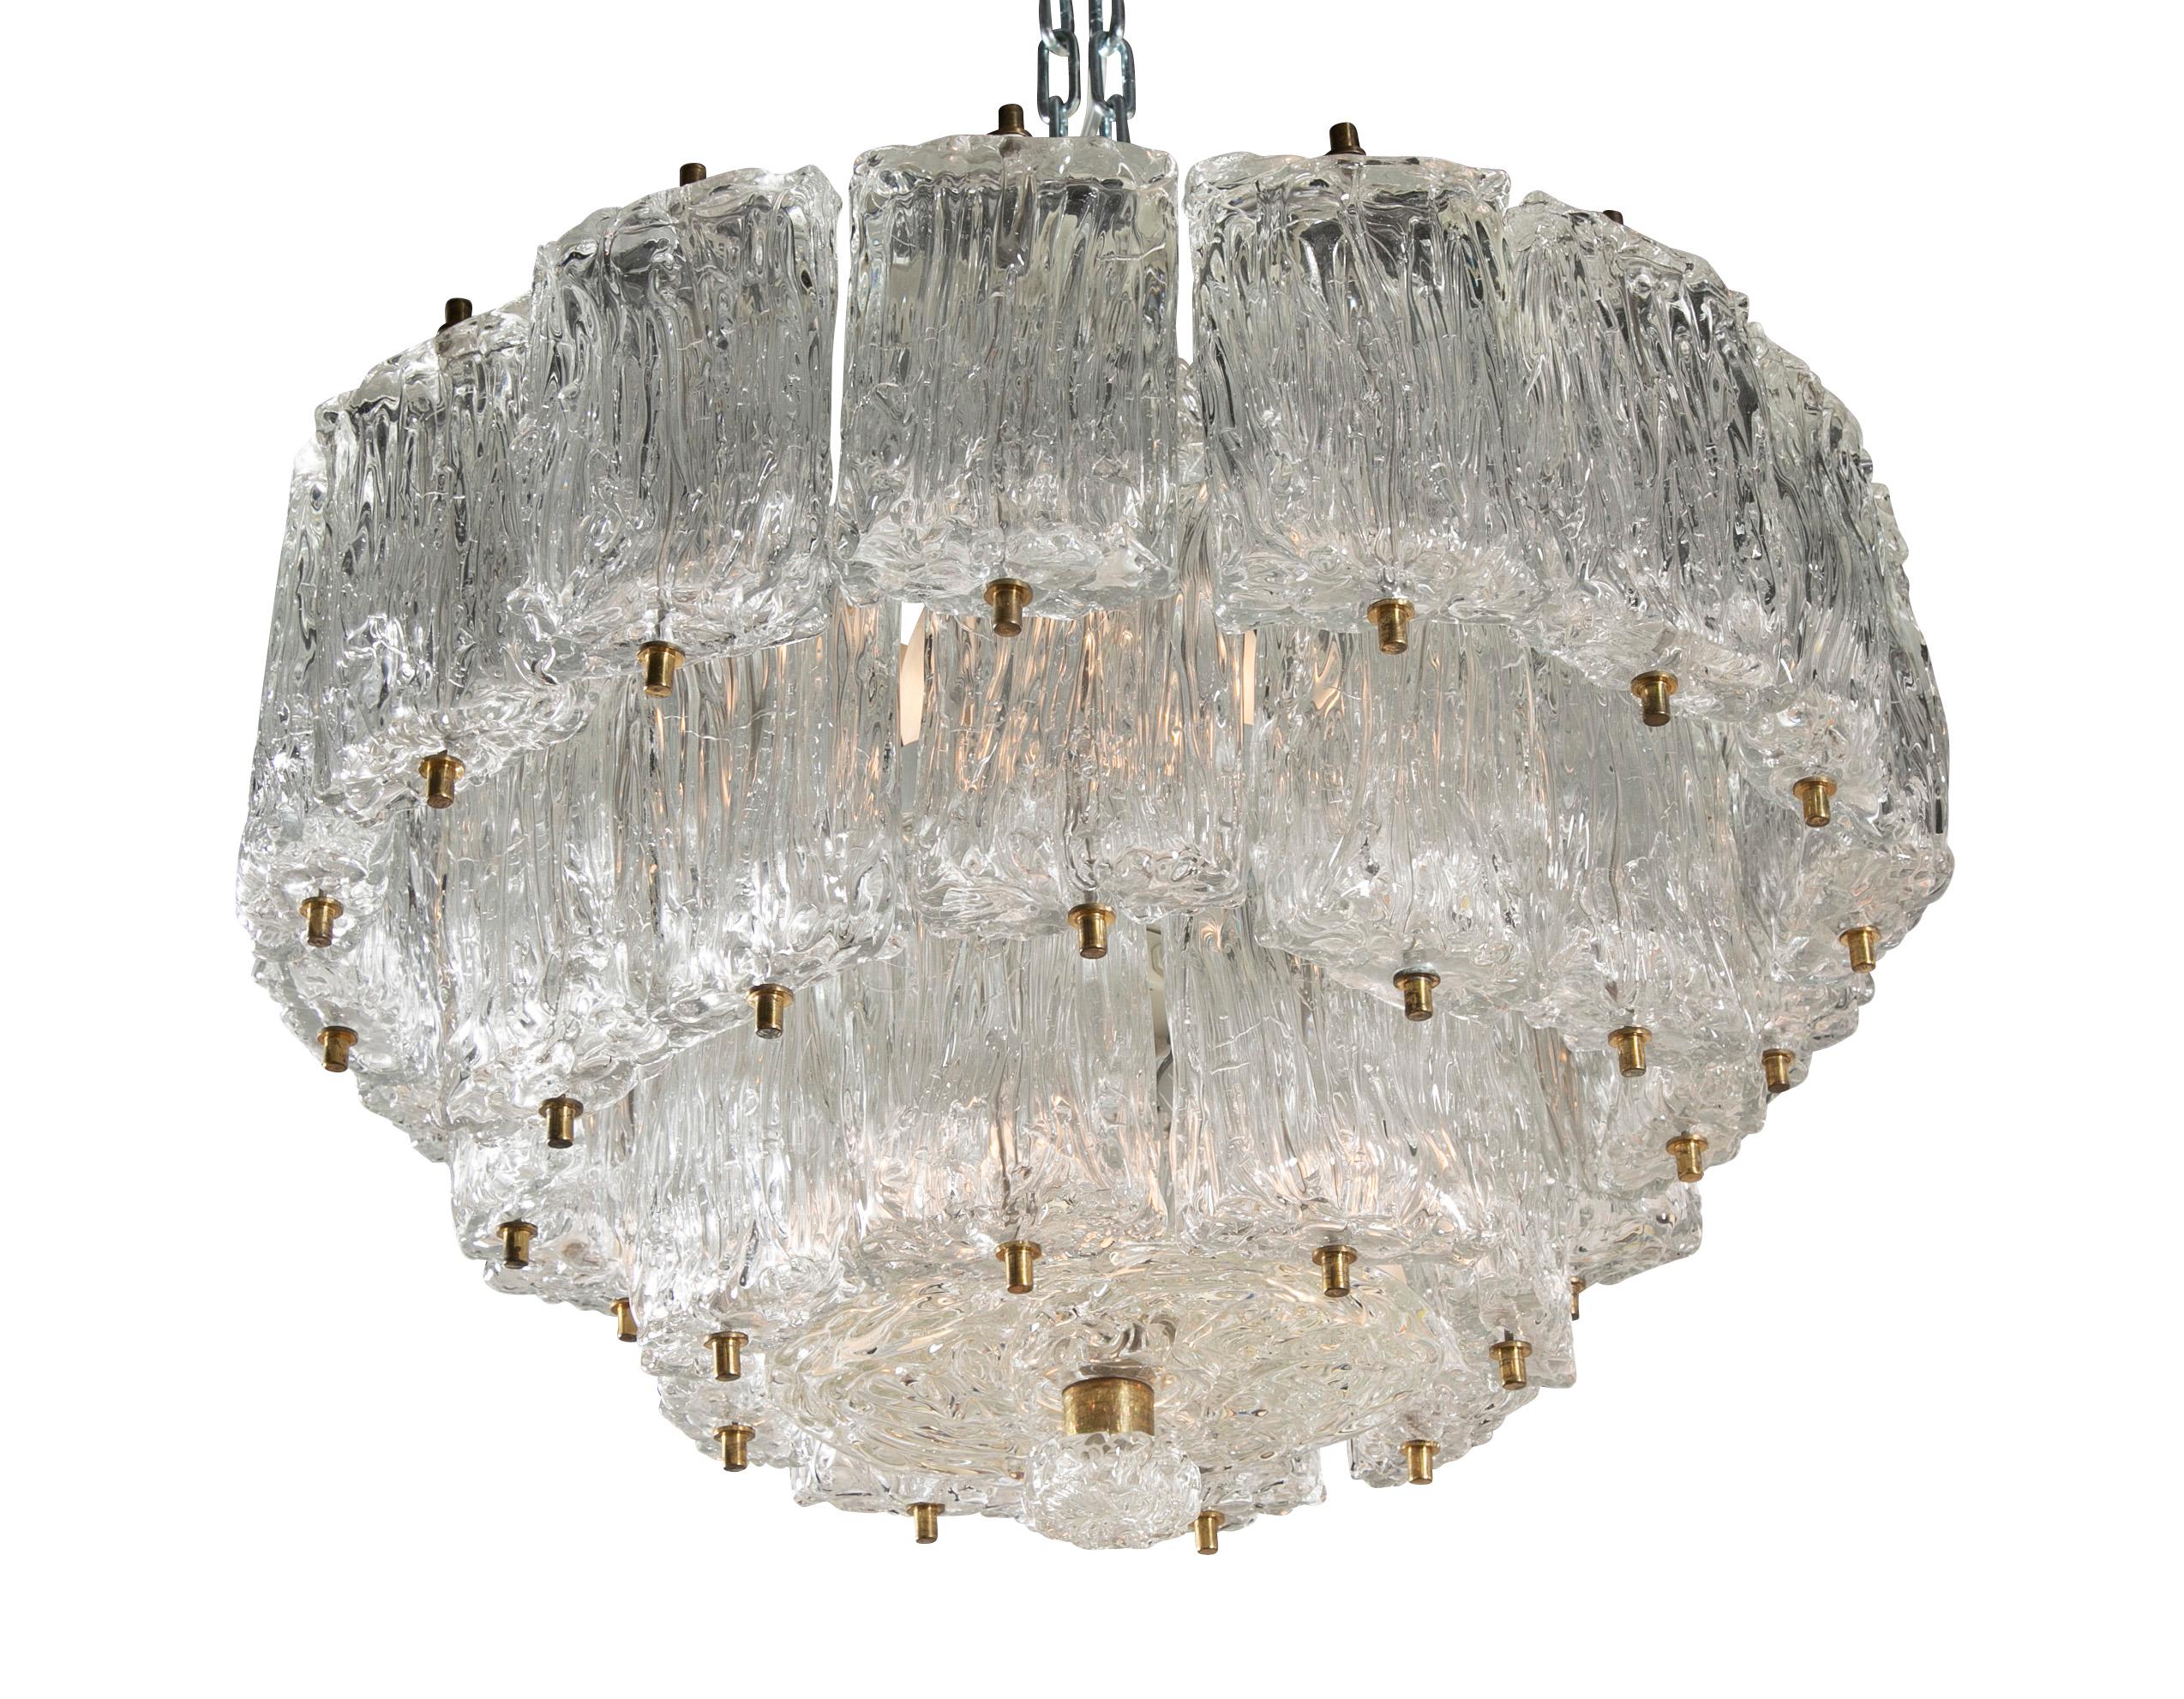 A Murano blown glass chandelier by Barovier & Toso, circa 1965.